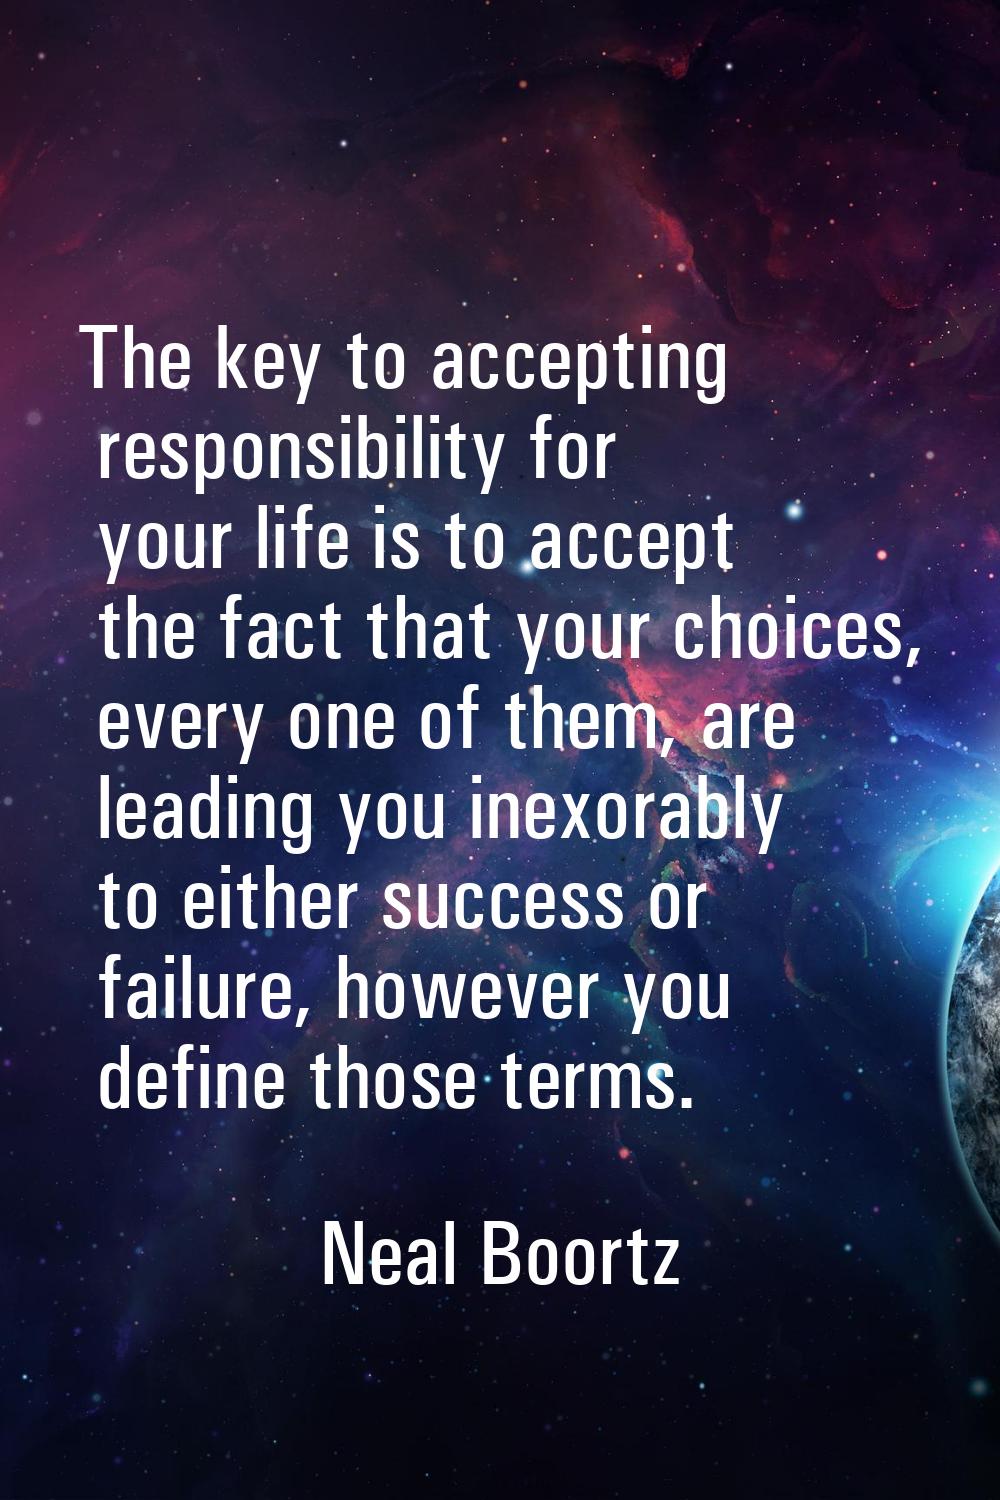 The key to accepting responsibility for your life is to accept the fact that your choices, every on